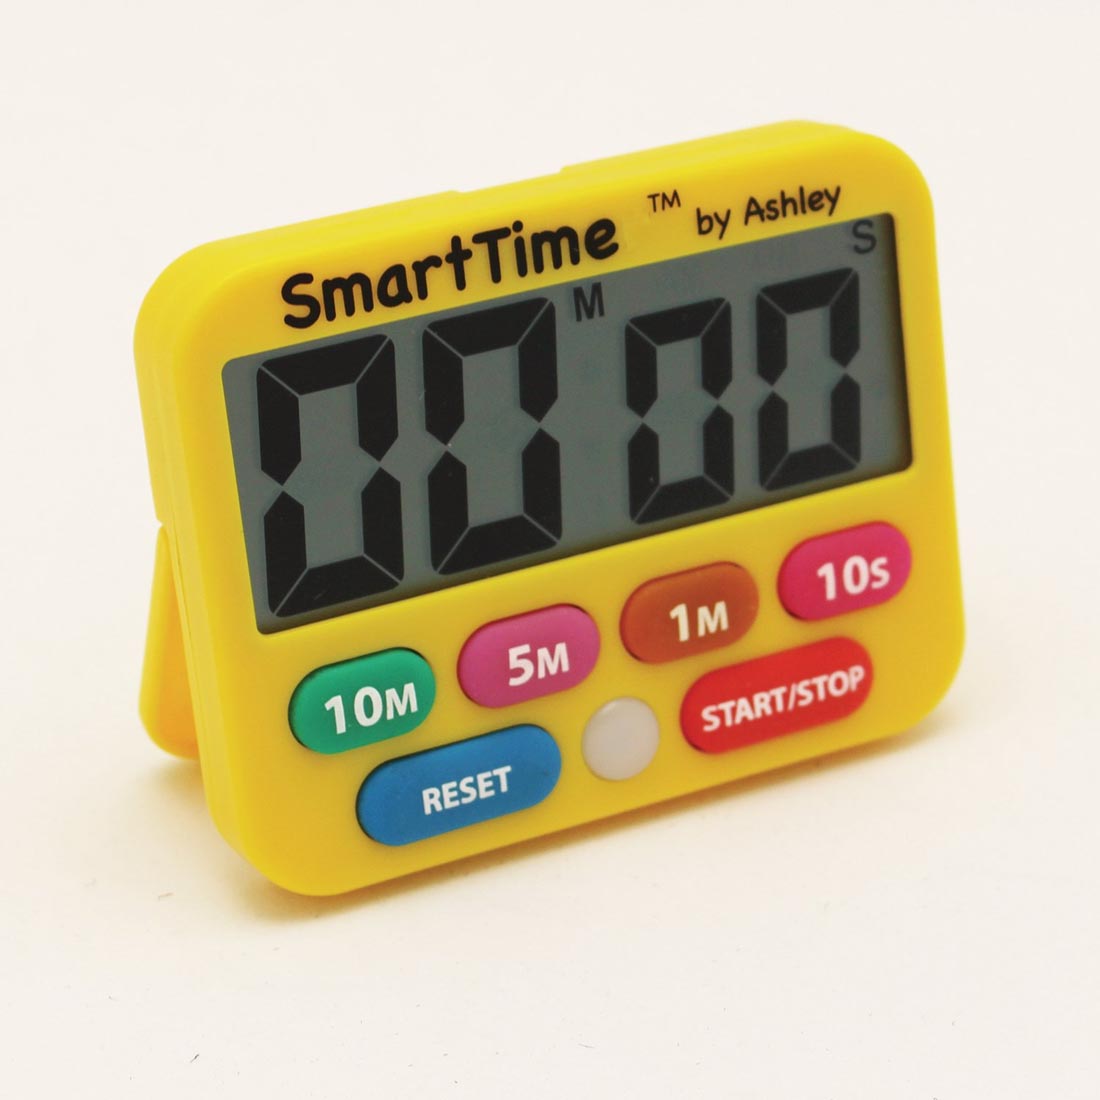 digital timer with buttons for ten, five, one minutes, ten seconds, plus start/stop and reset